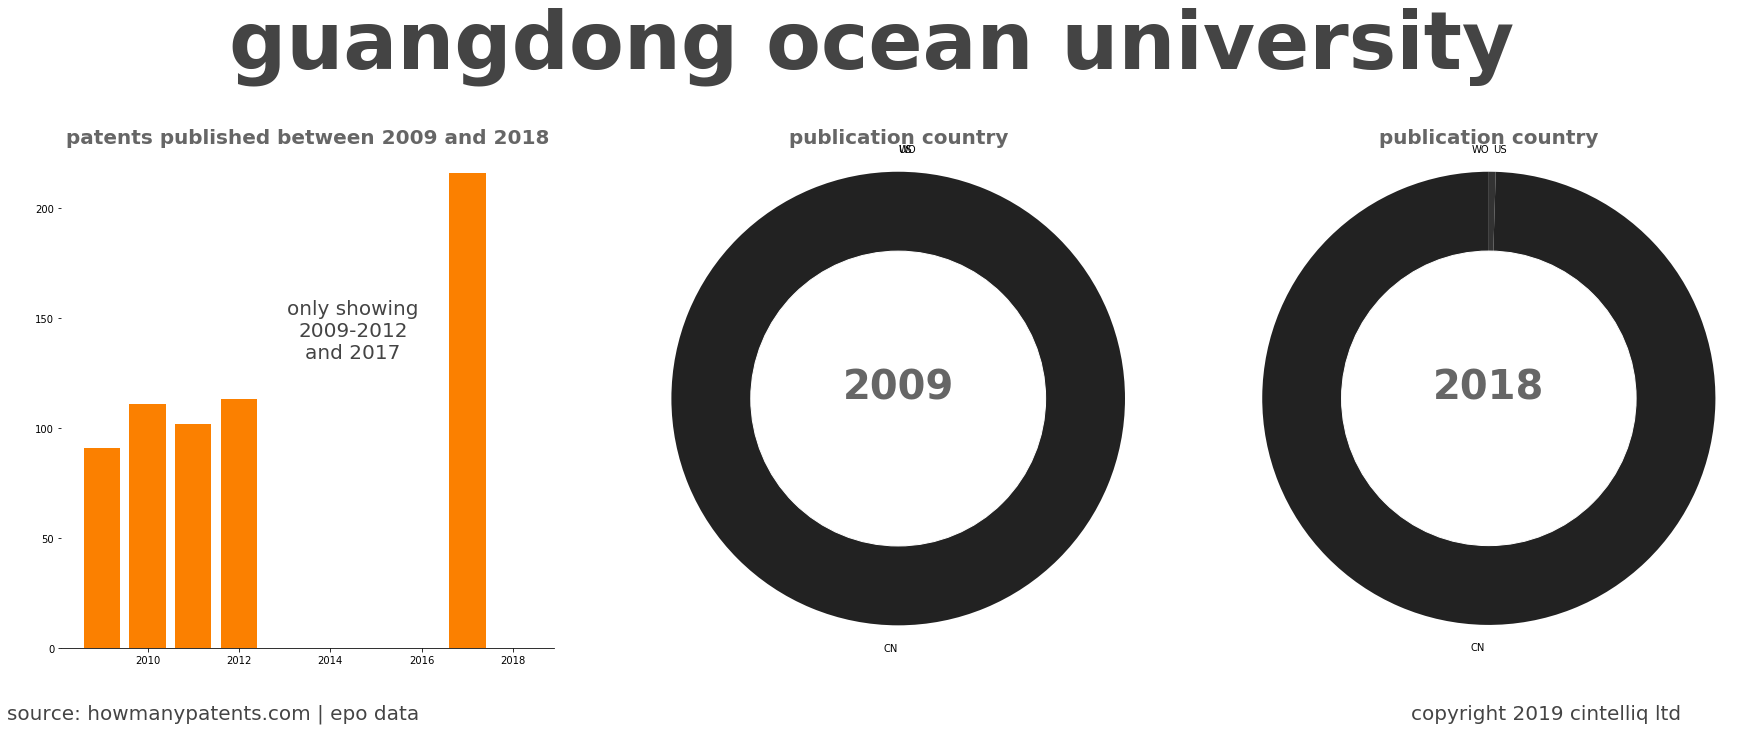 summary of patents for Guangdong Ocean University